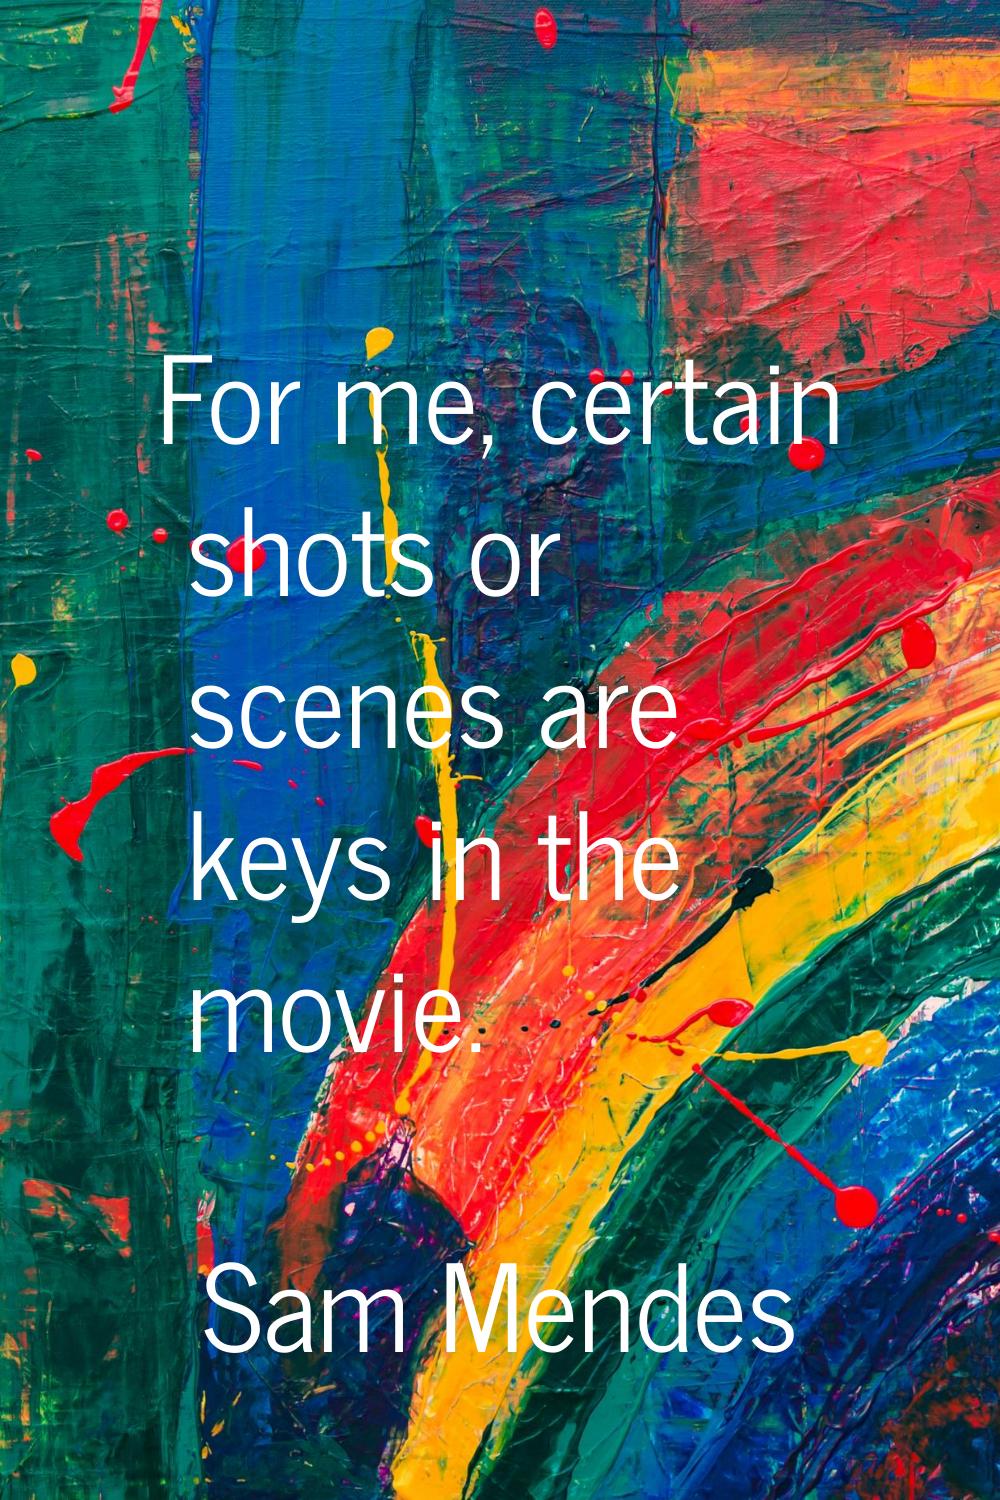 For me, certain shots or scenes are keys in the movie.